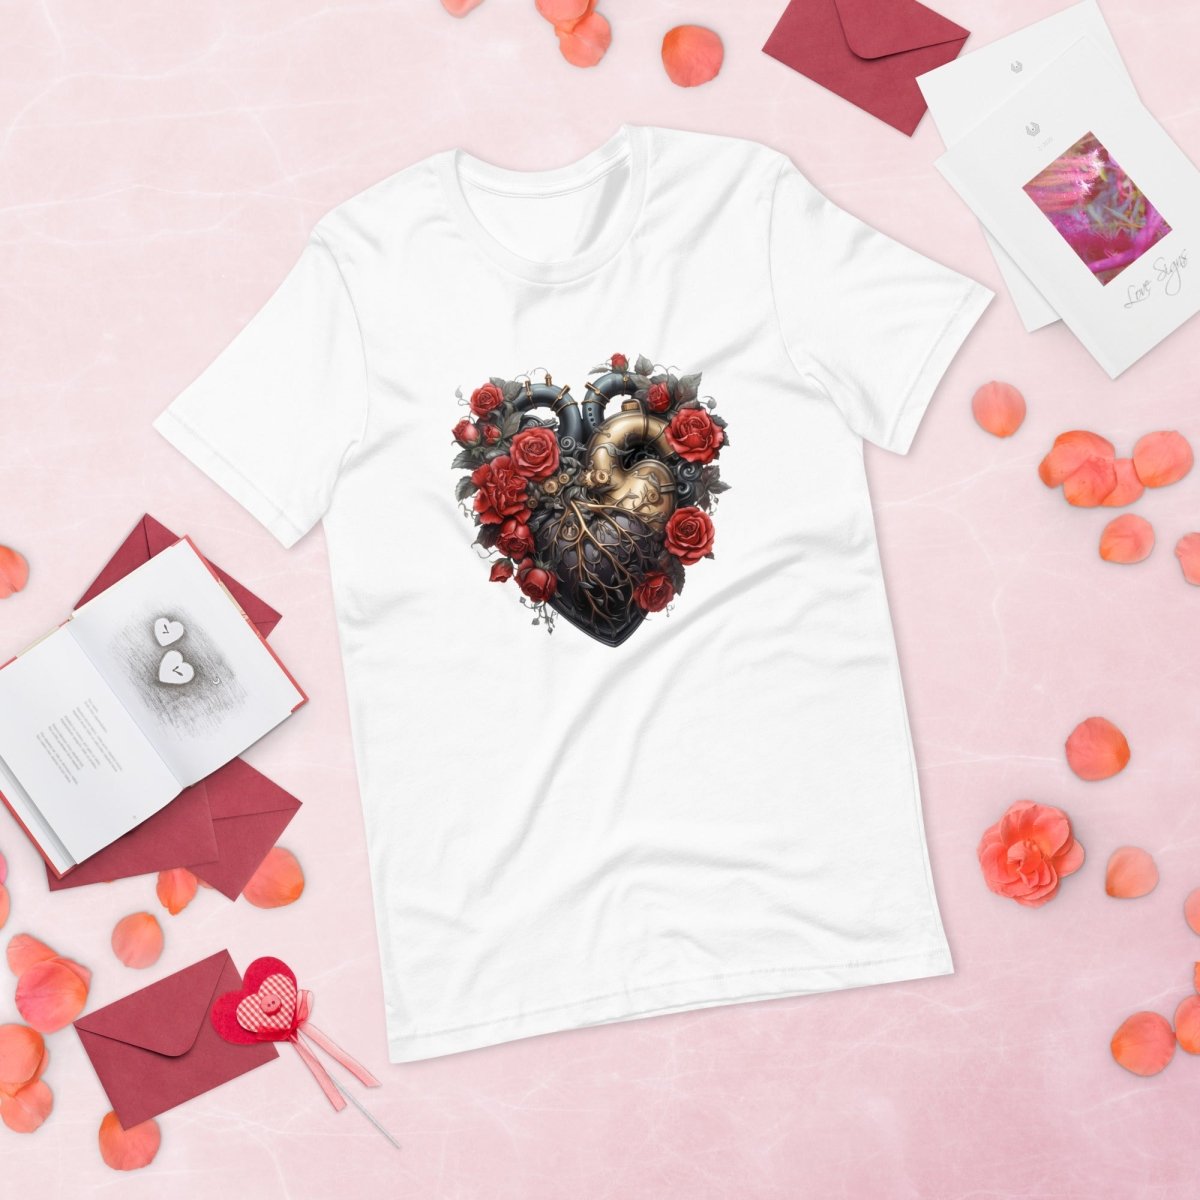 Steam Punk Heart T-Shirt High Quality Floral Heart Valentines Day Shirt Love Gift for Her Love Tee Gothic Heart Tee Love Shirt Dark Love - Everything Pixel